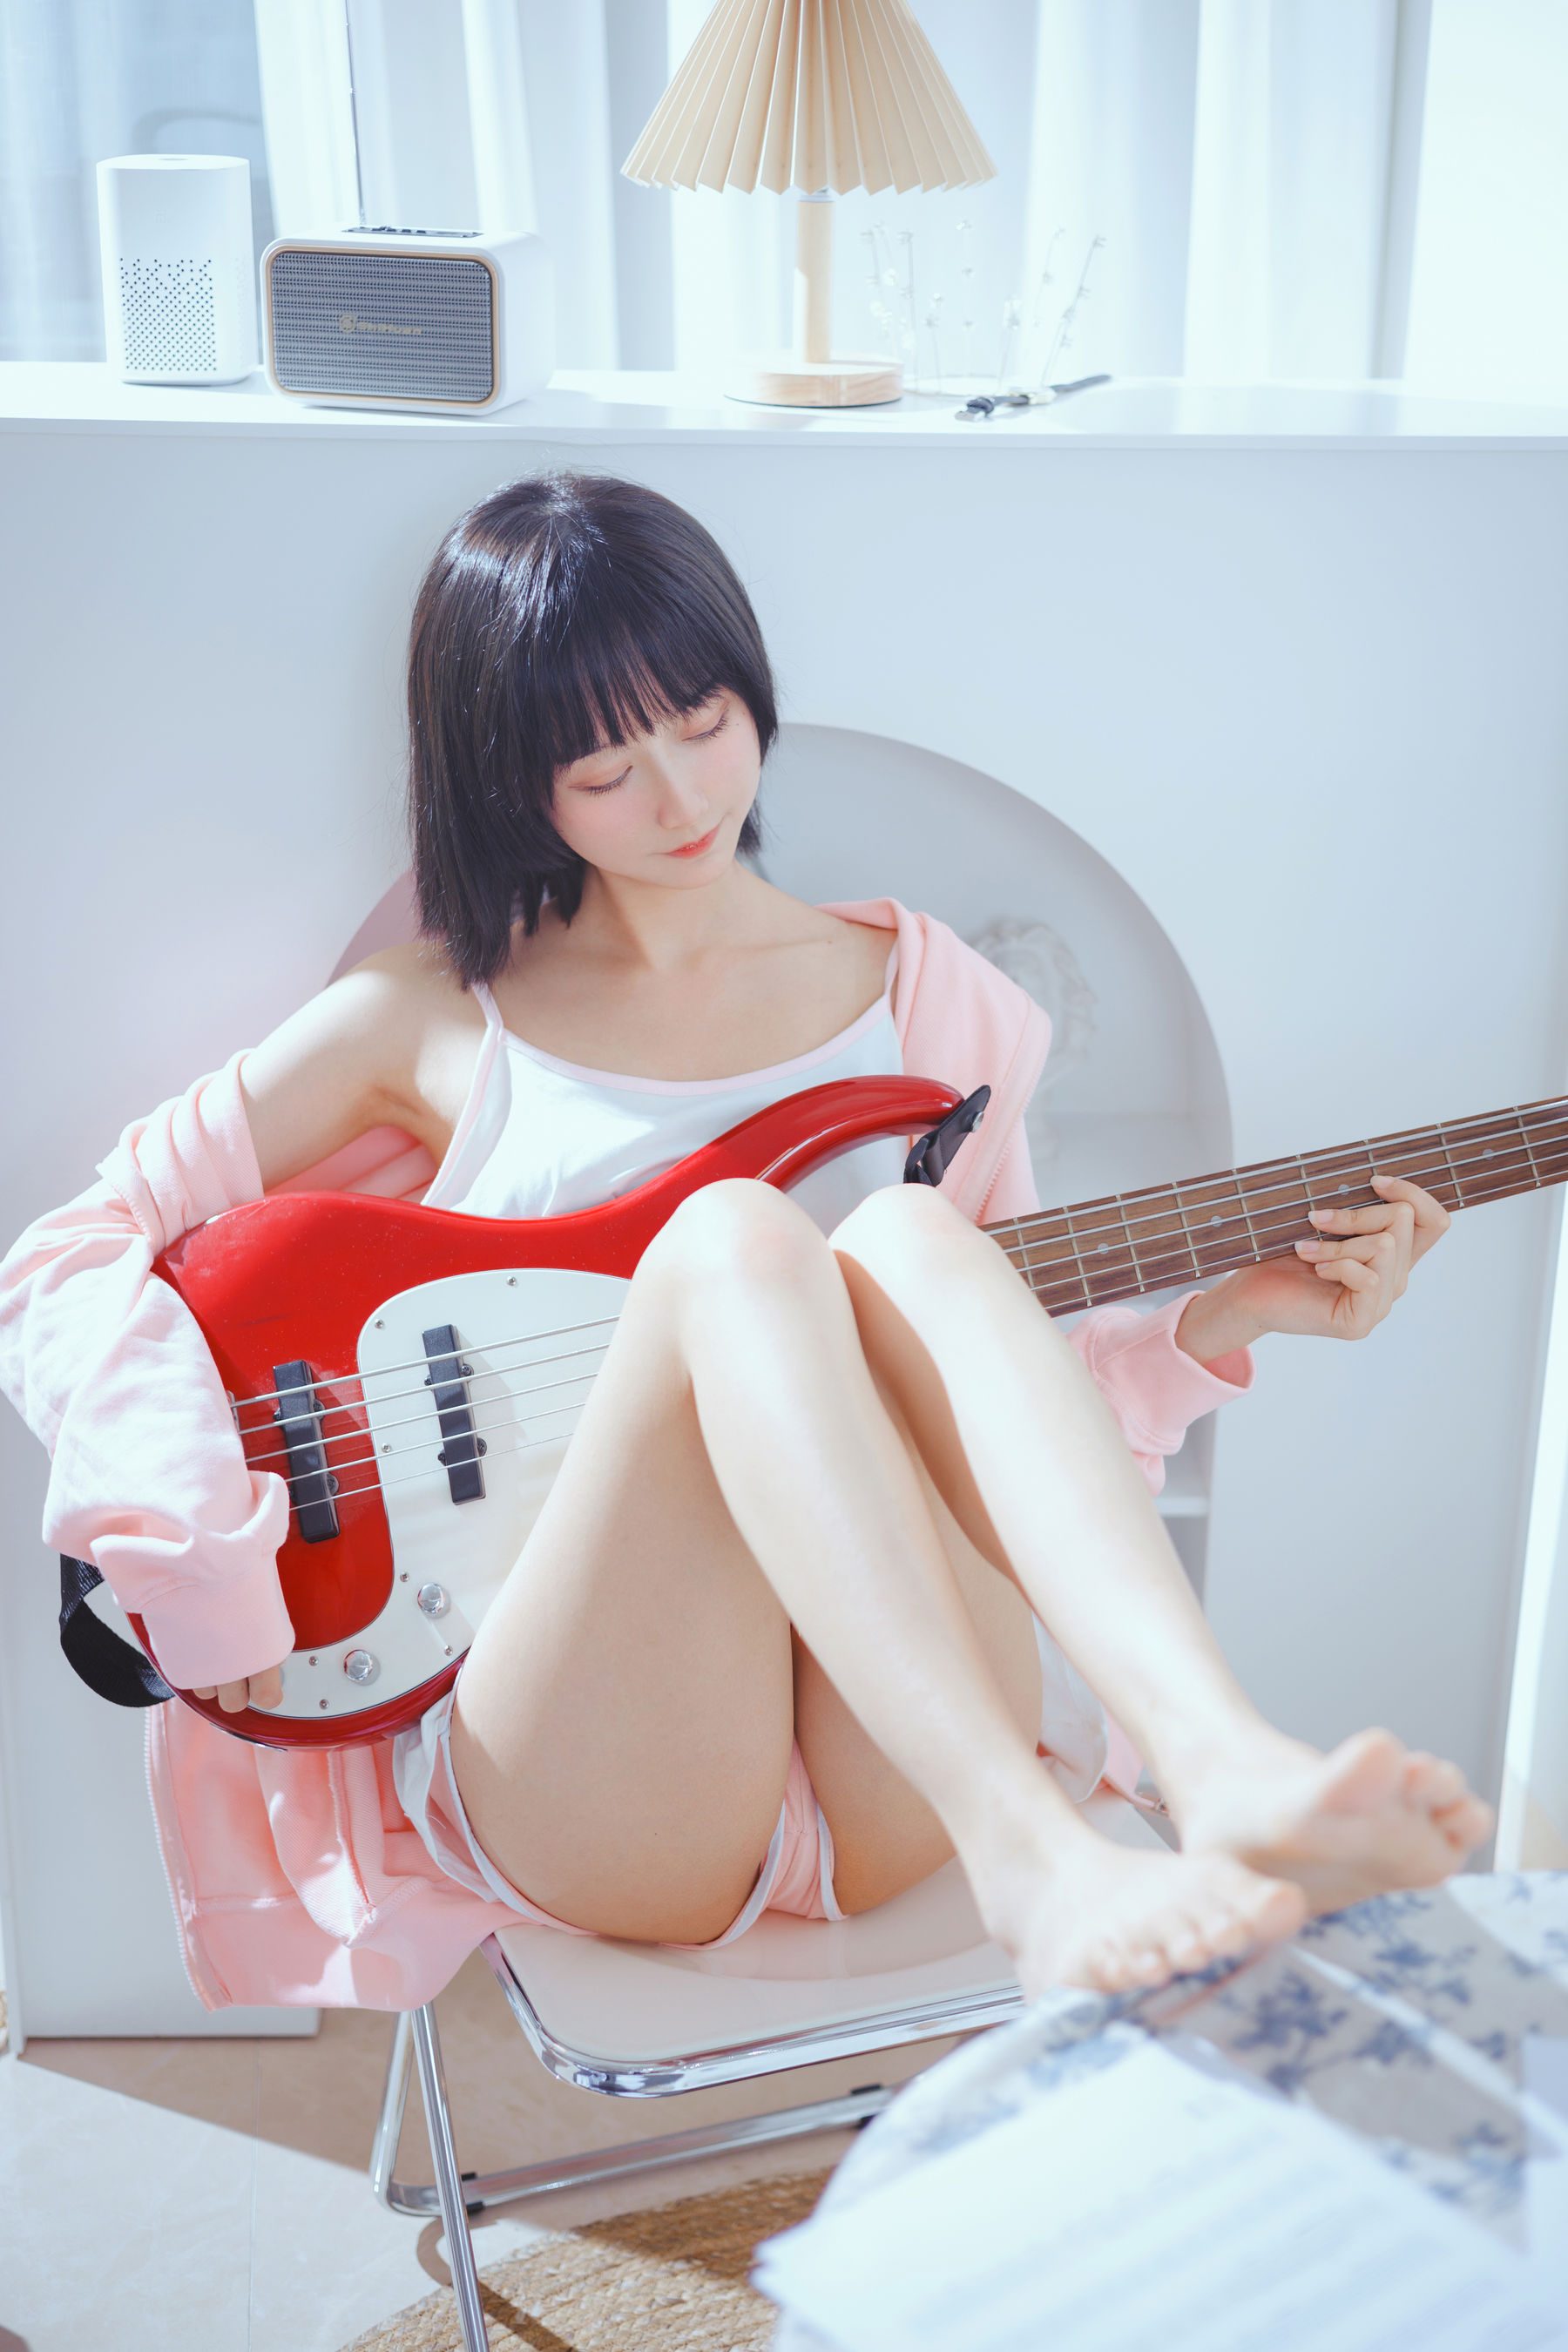 [Net Red COSER Photo] Cute Miss Sister Mu Mianmian OwO - Bass and Sister Page 44 No.c1d7f6